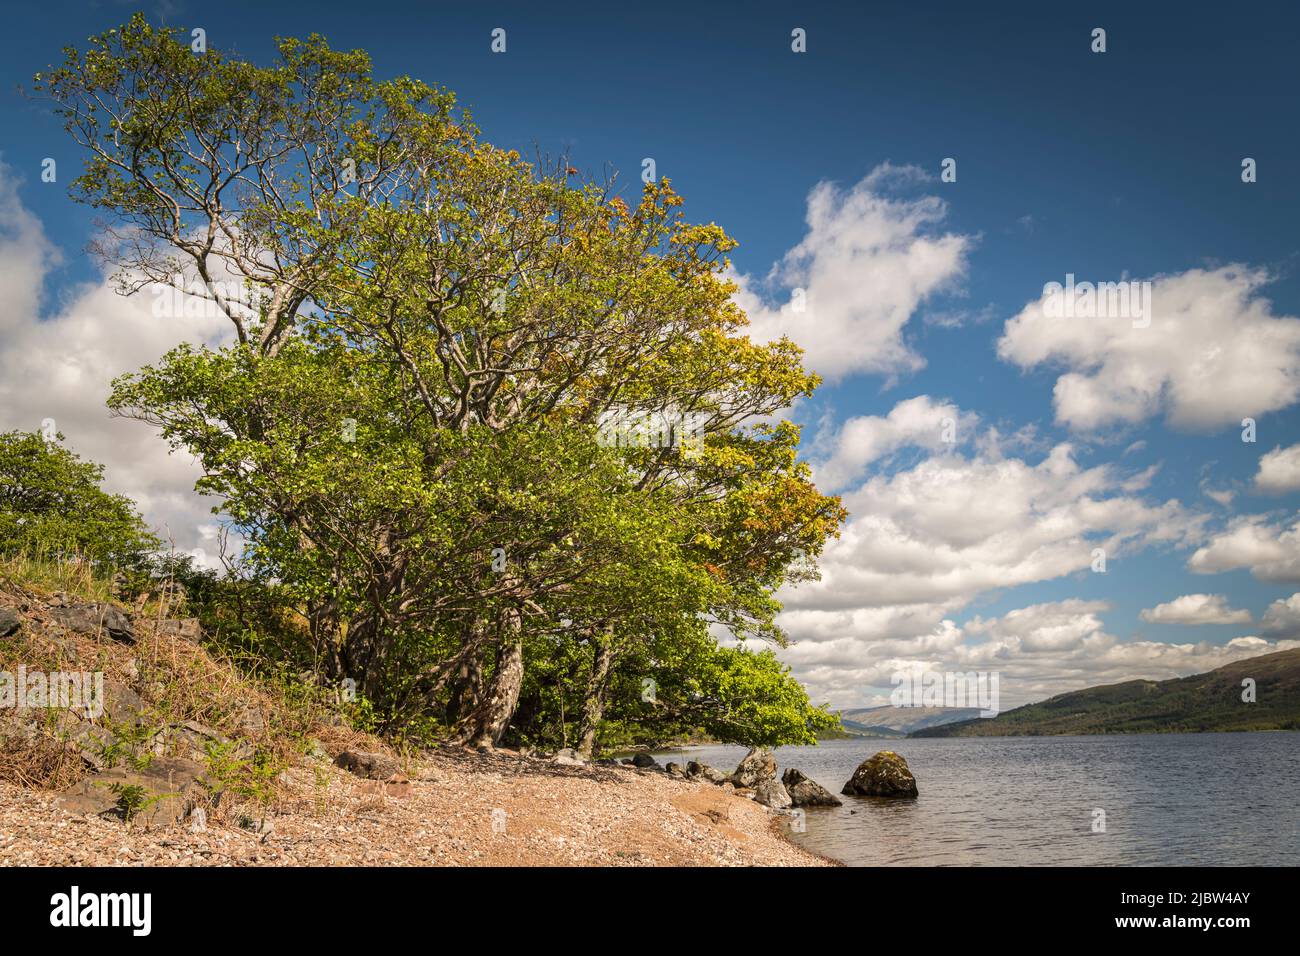 A sunny summer HDR image of oak trees, Quercus, beside Loch Arkaig in Lochaber, Scotland. 28 May 2022 Stock Photo